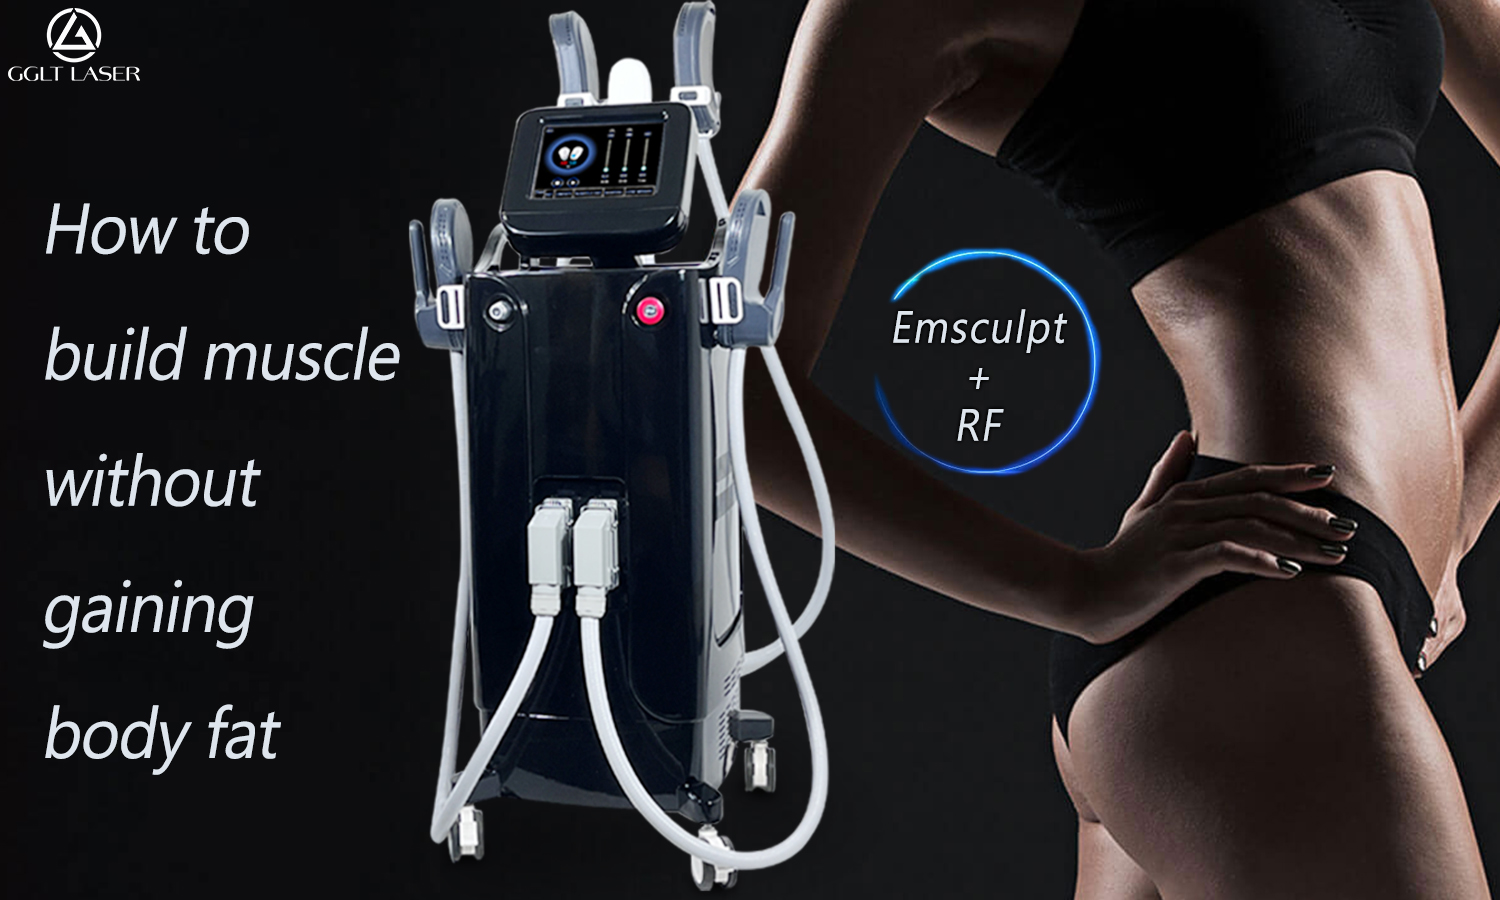 What is the principle of increasing muscle and reducing fat in EMSculpt?